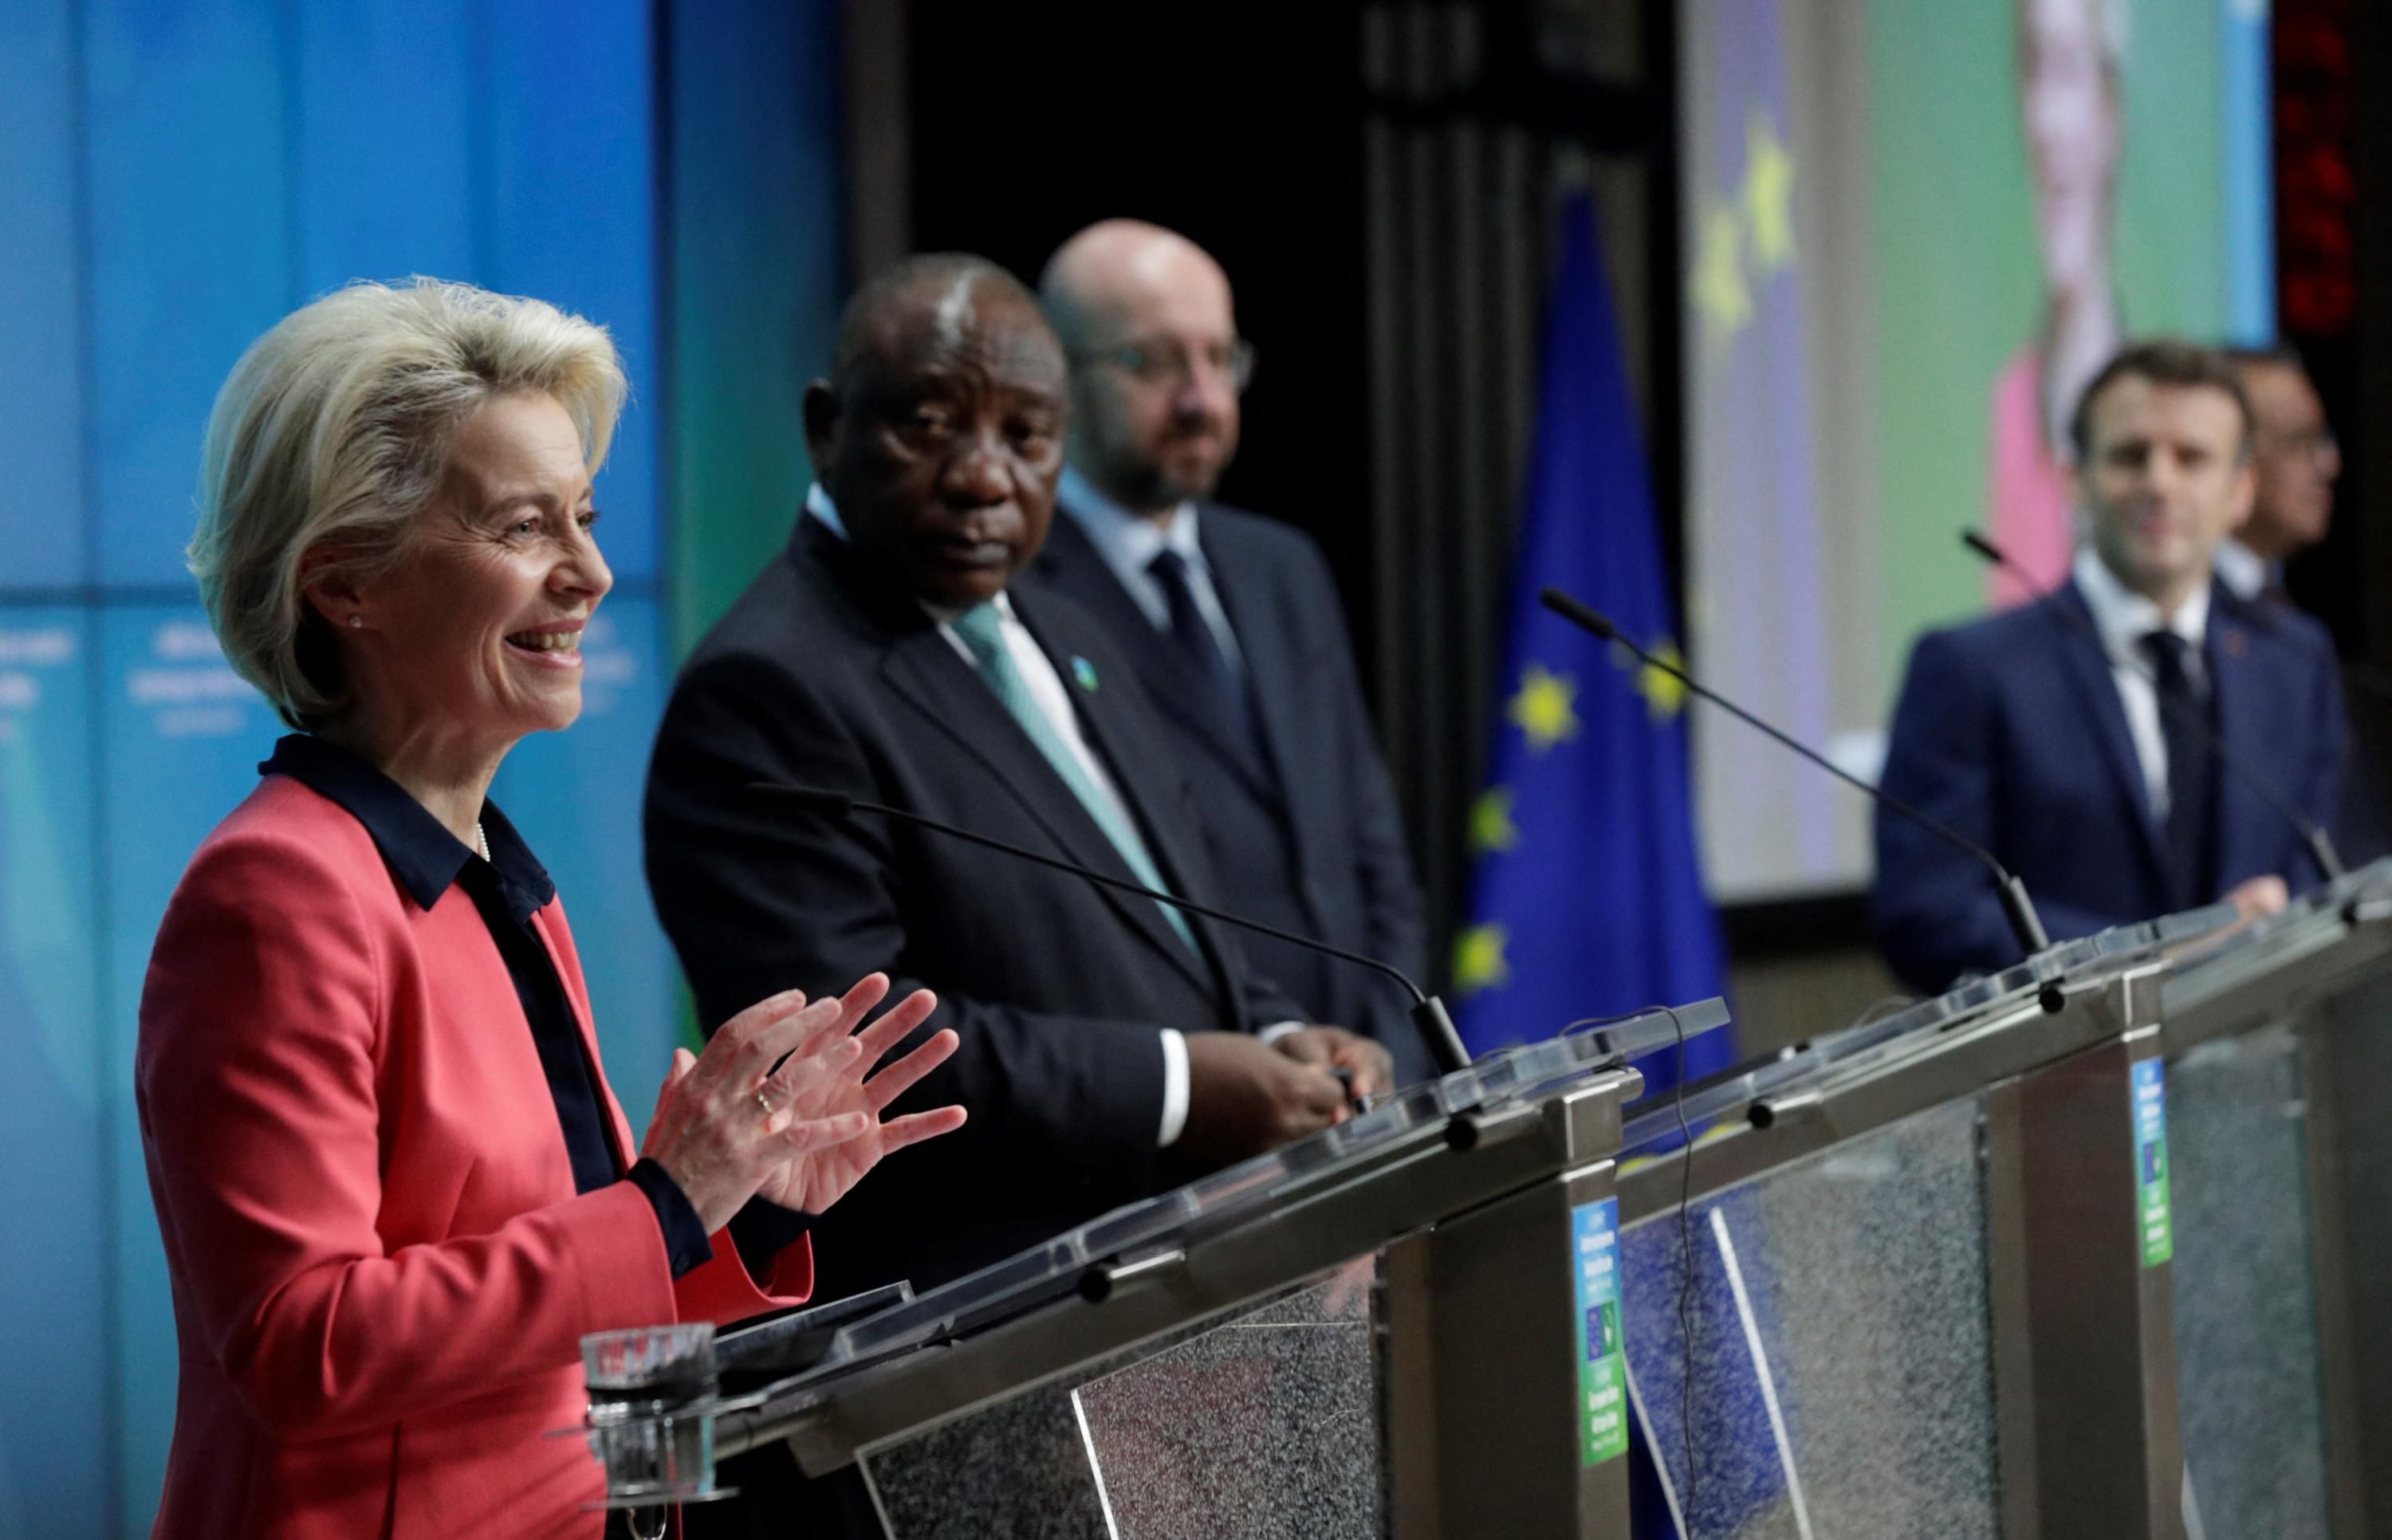 The head of the European Commission speaks during an event